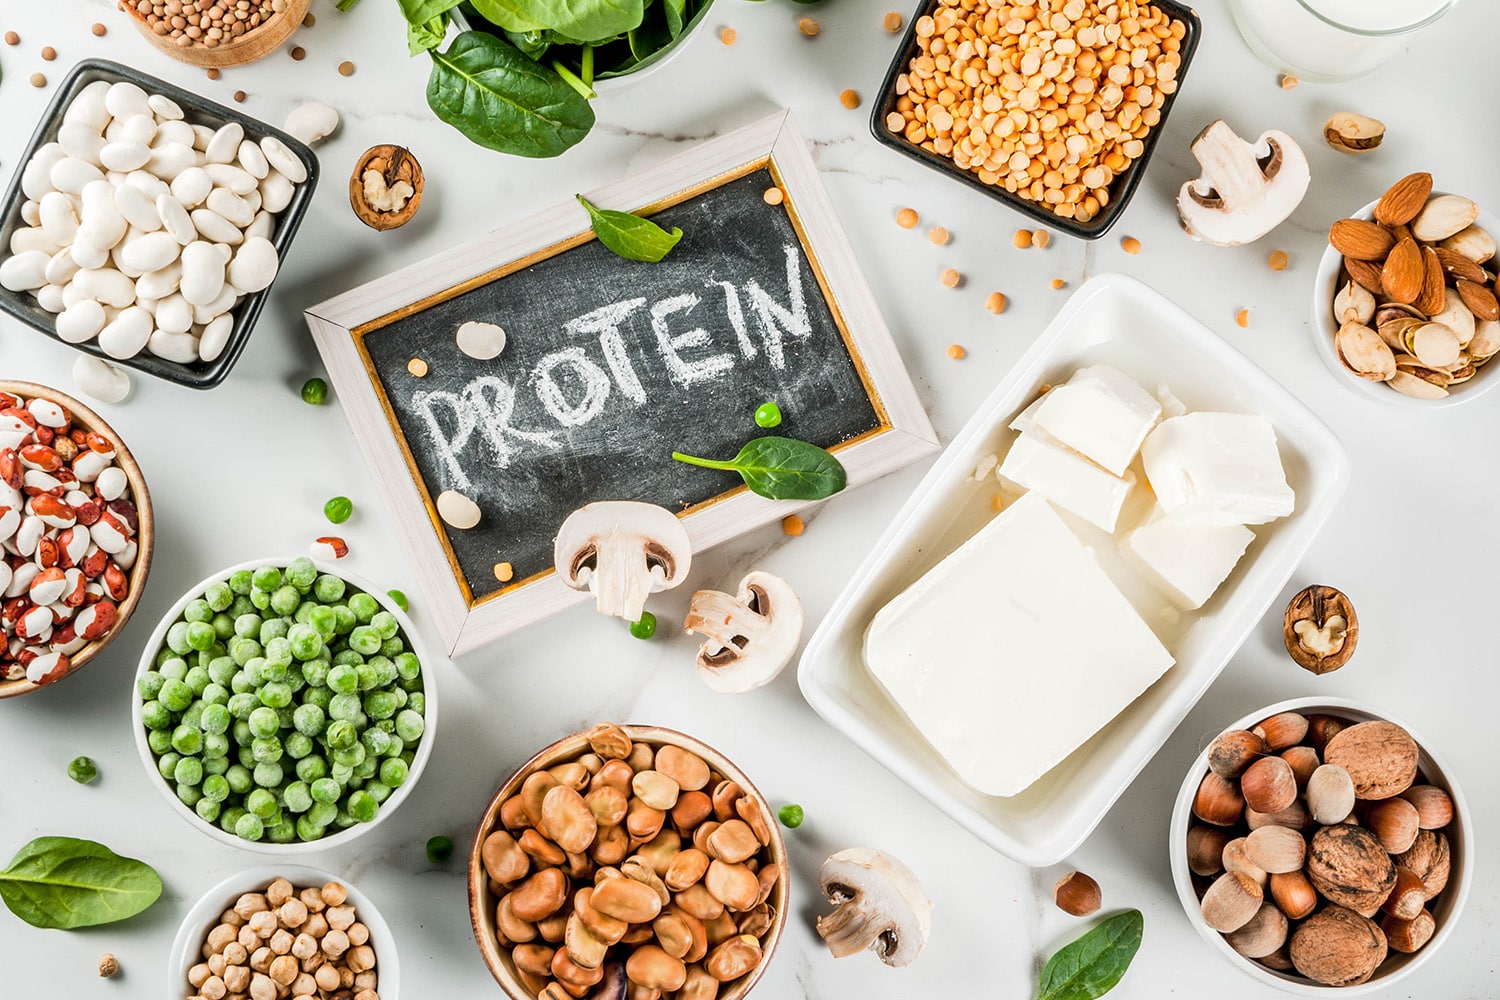 Natural and healthy proteins like tofu, peas, nuts, cheese, beans, lentils